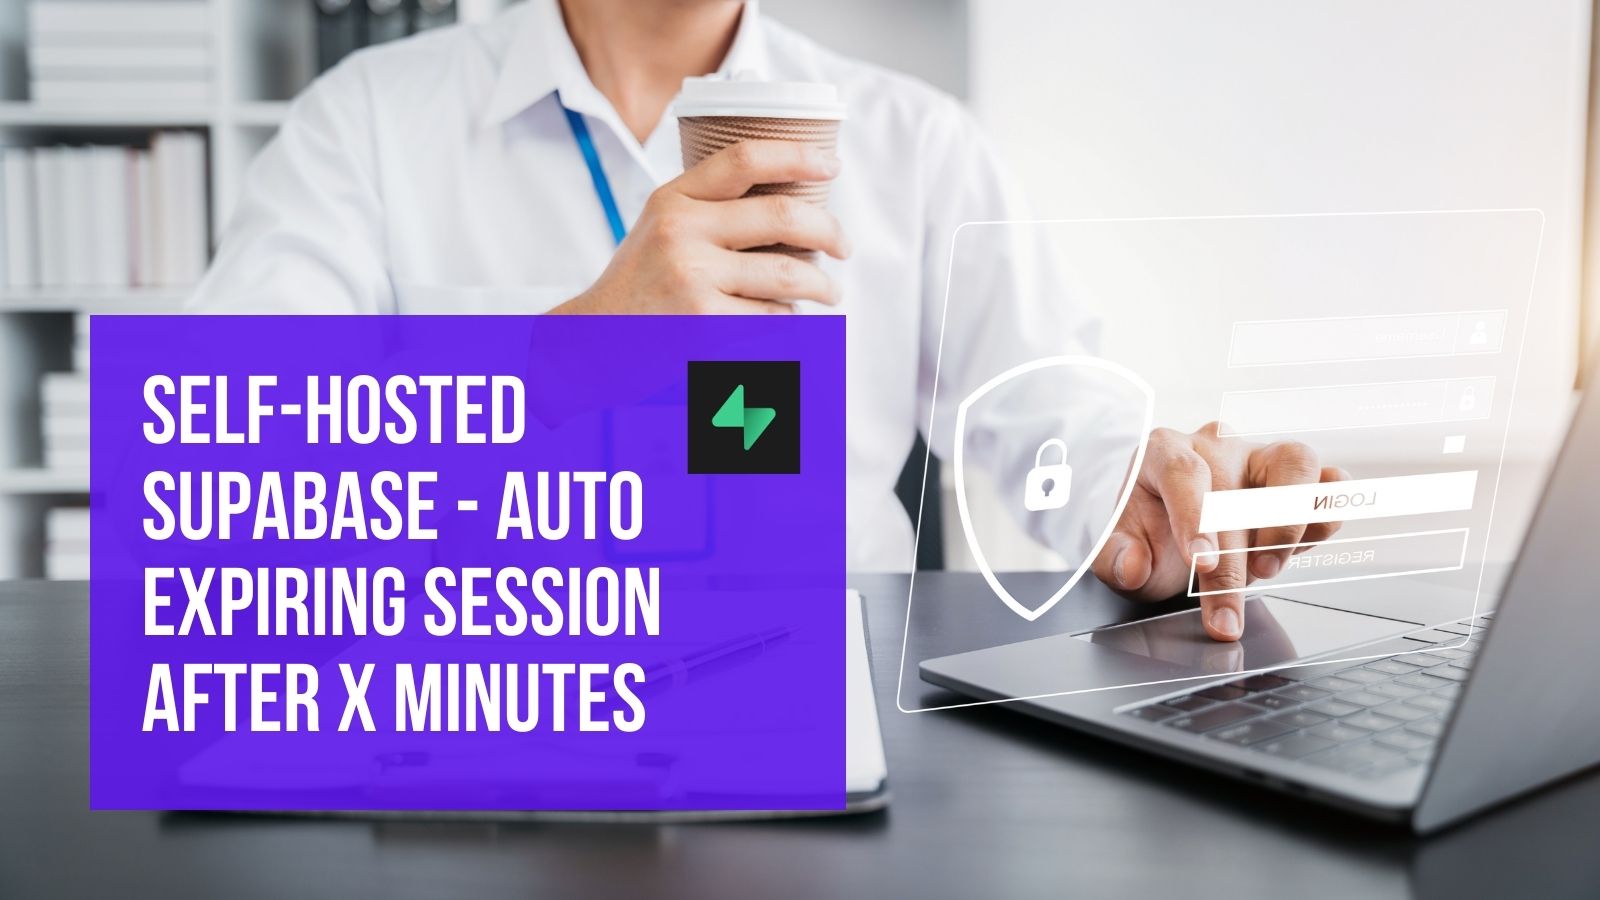 Self-hosted Supabase - Auto Expiring Session After X Minutes